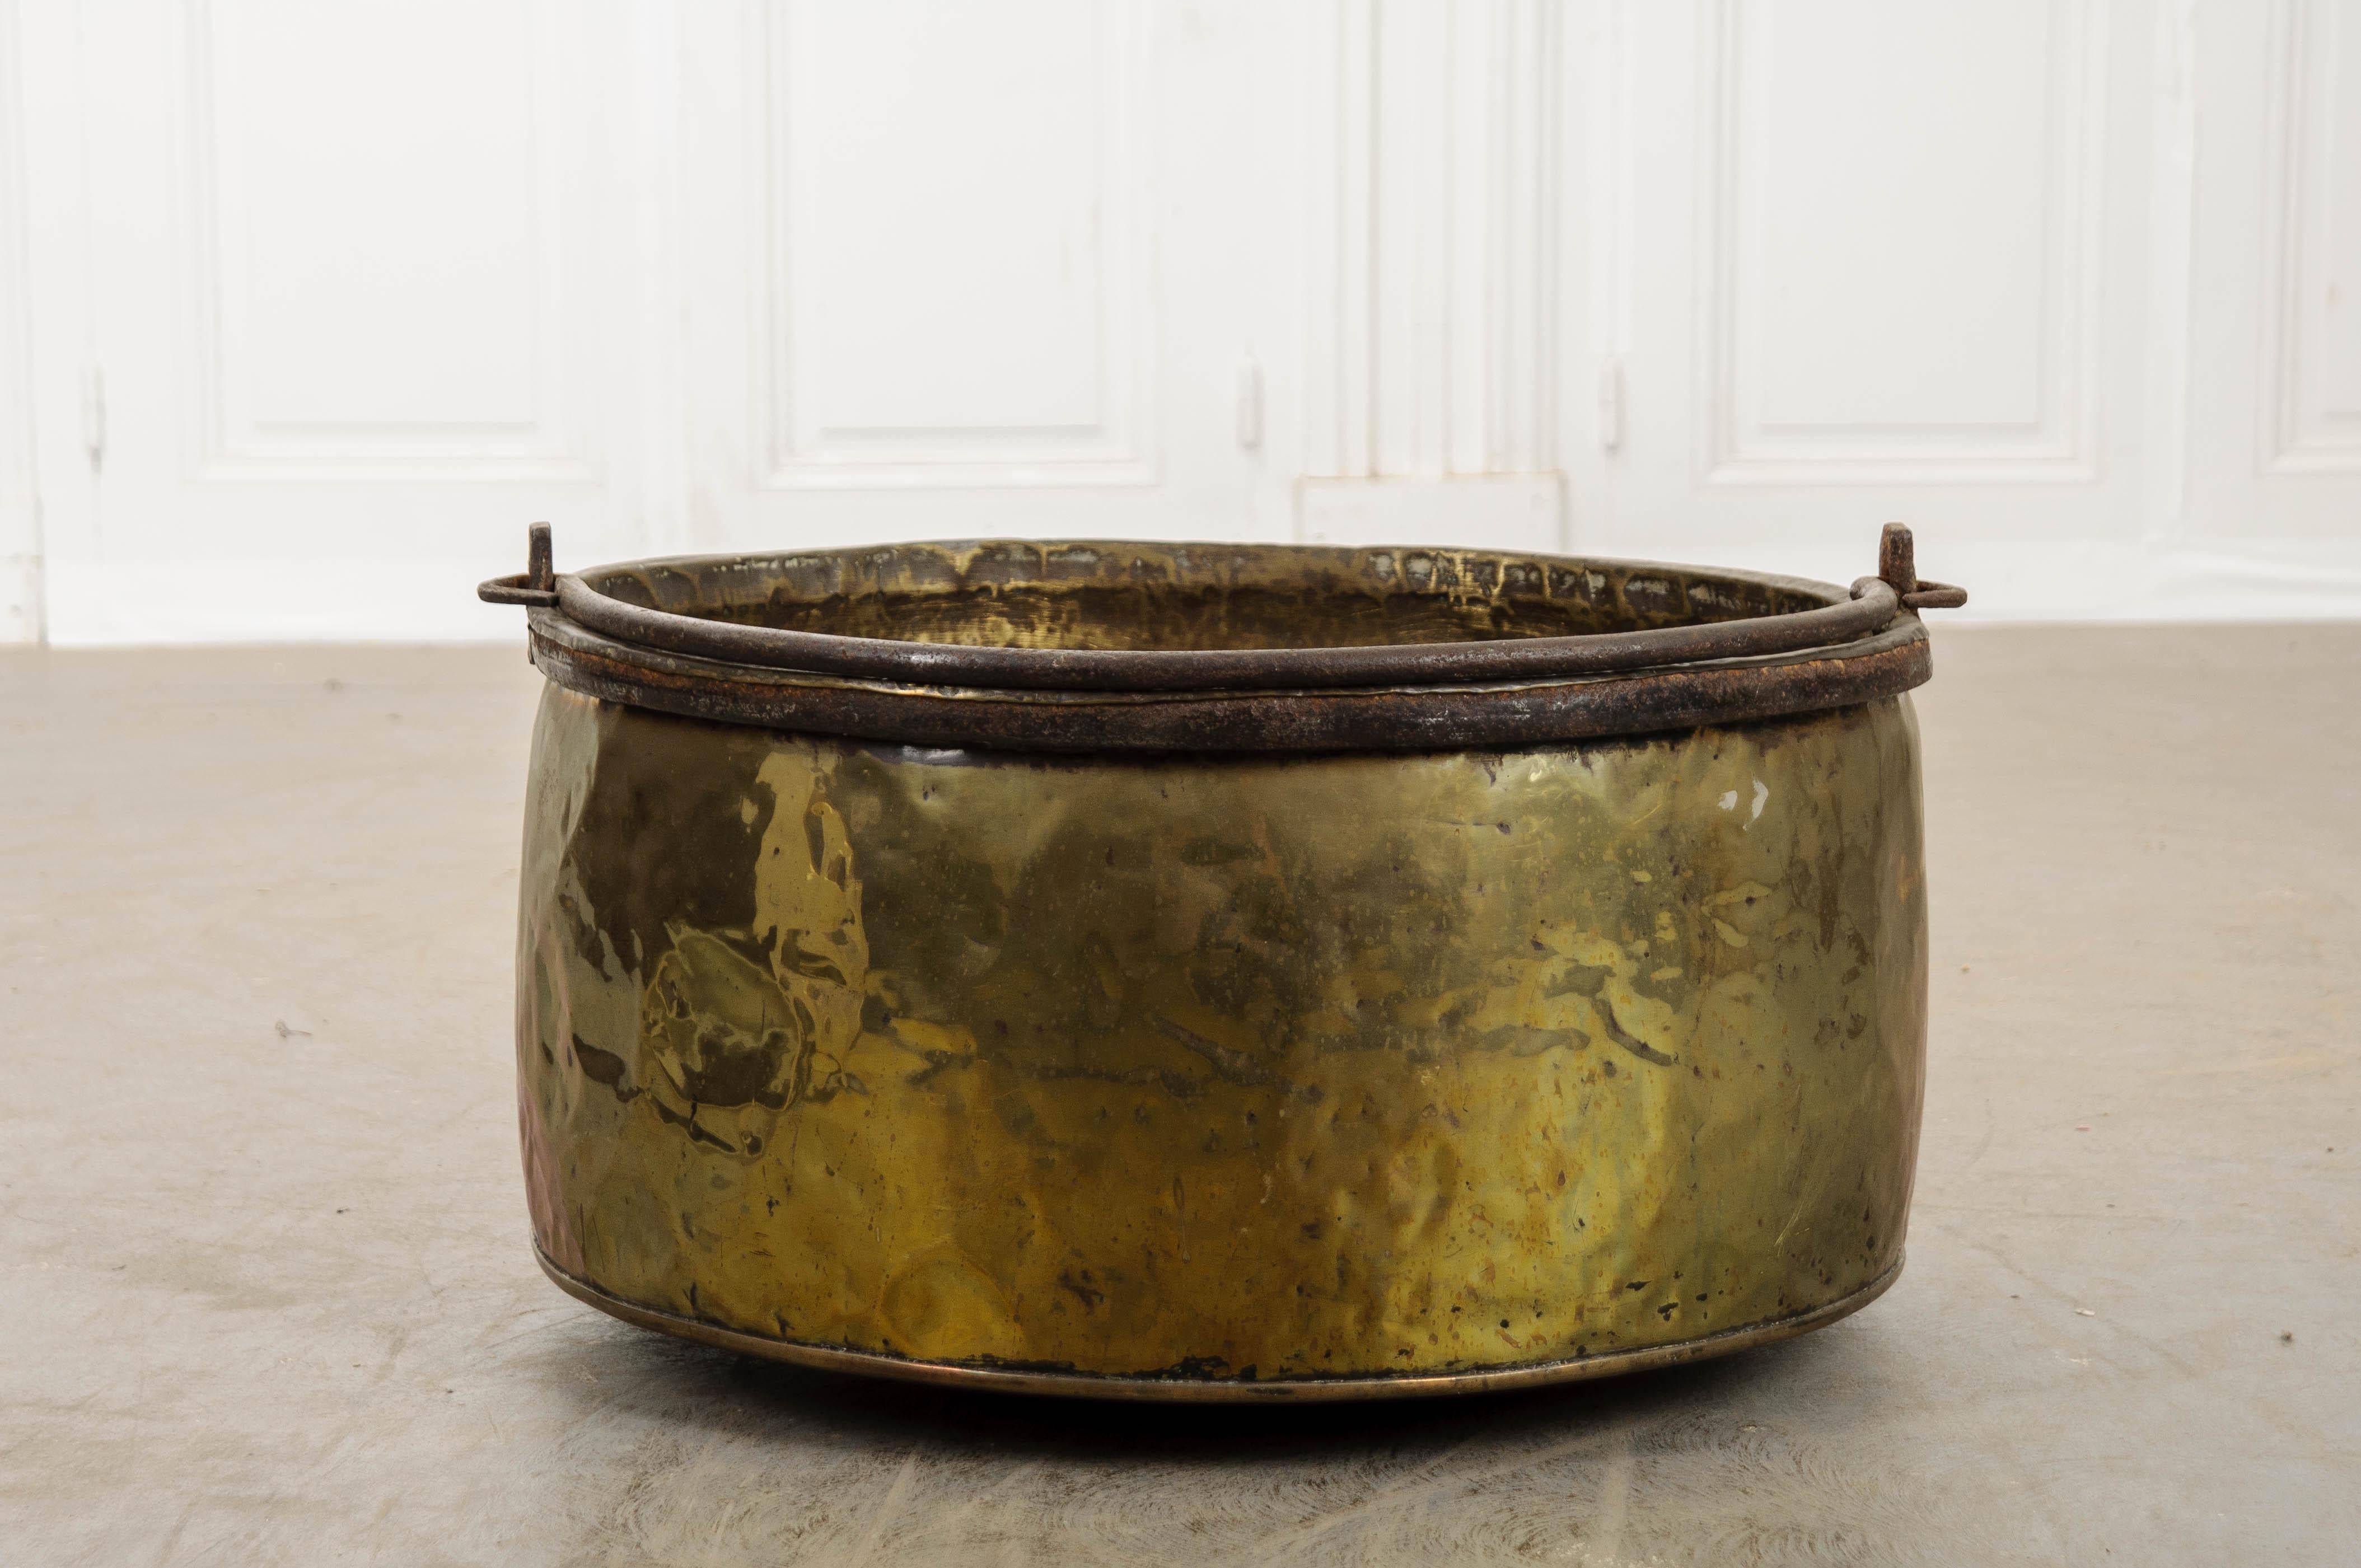 A sizable vessel, made in France circa 1880 of solid brass. The pot has a large iron handle for carrying or hanging it. It will lay flat when not being used. Over the years, the brass has taken on an antiqued character with decades of dings and